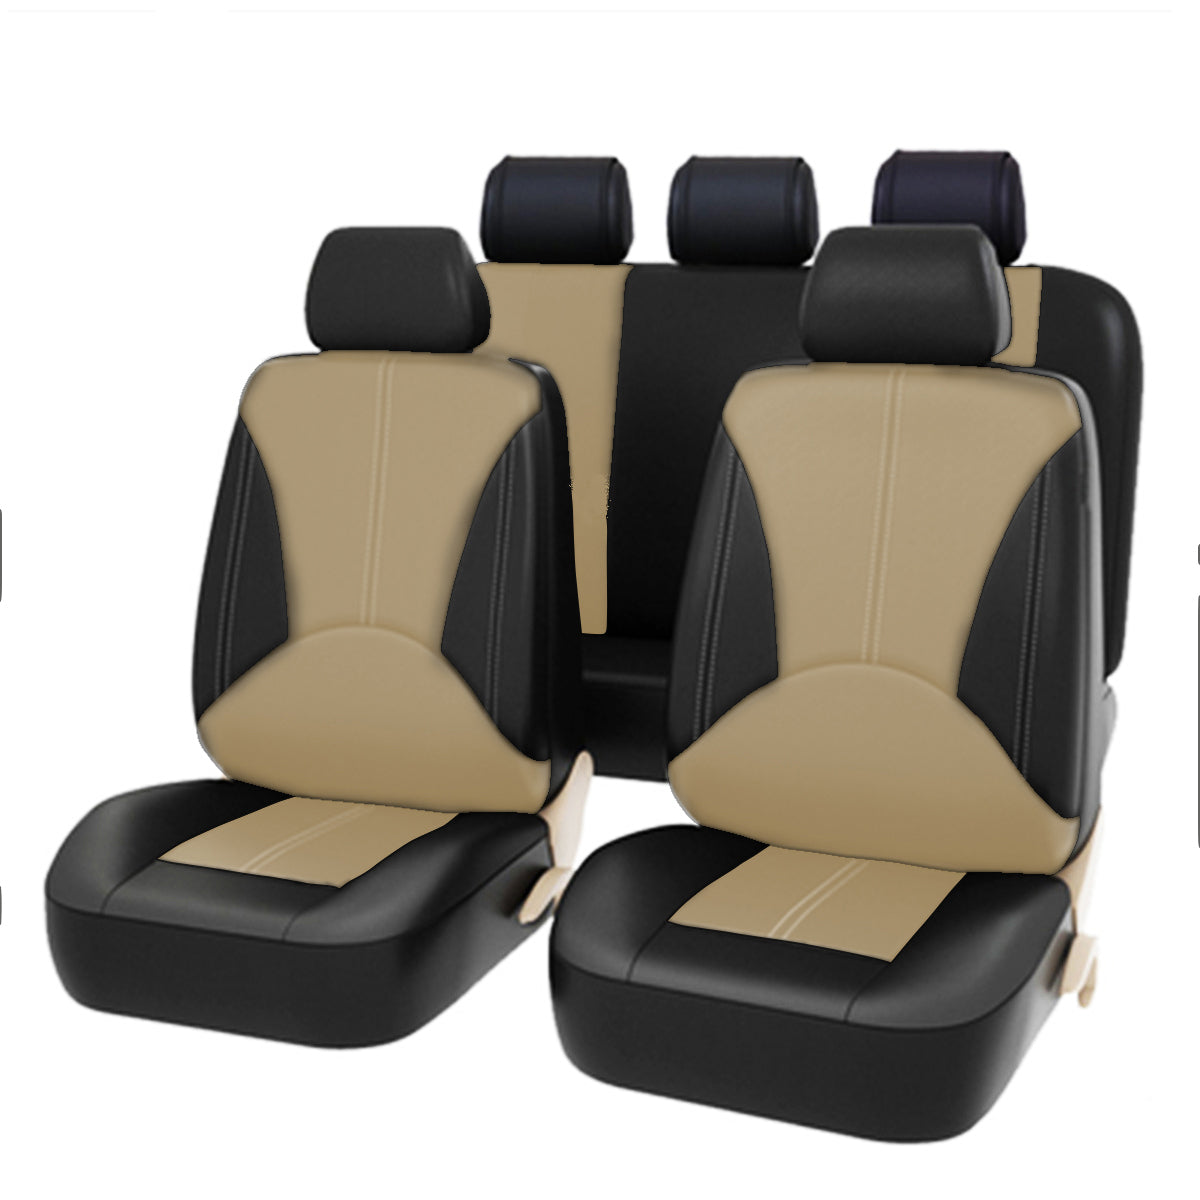 Bucket Seat Cover Set Front Rear Universal for Car Sedan Truck SUV PU Leather - Auto GoShop